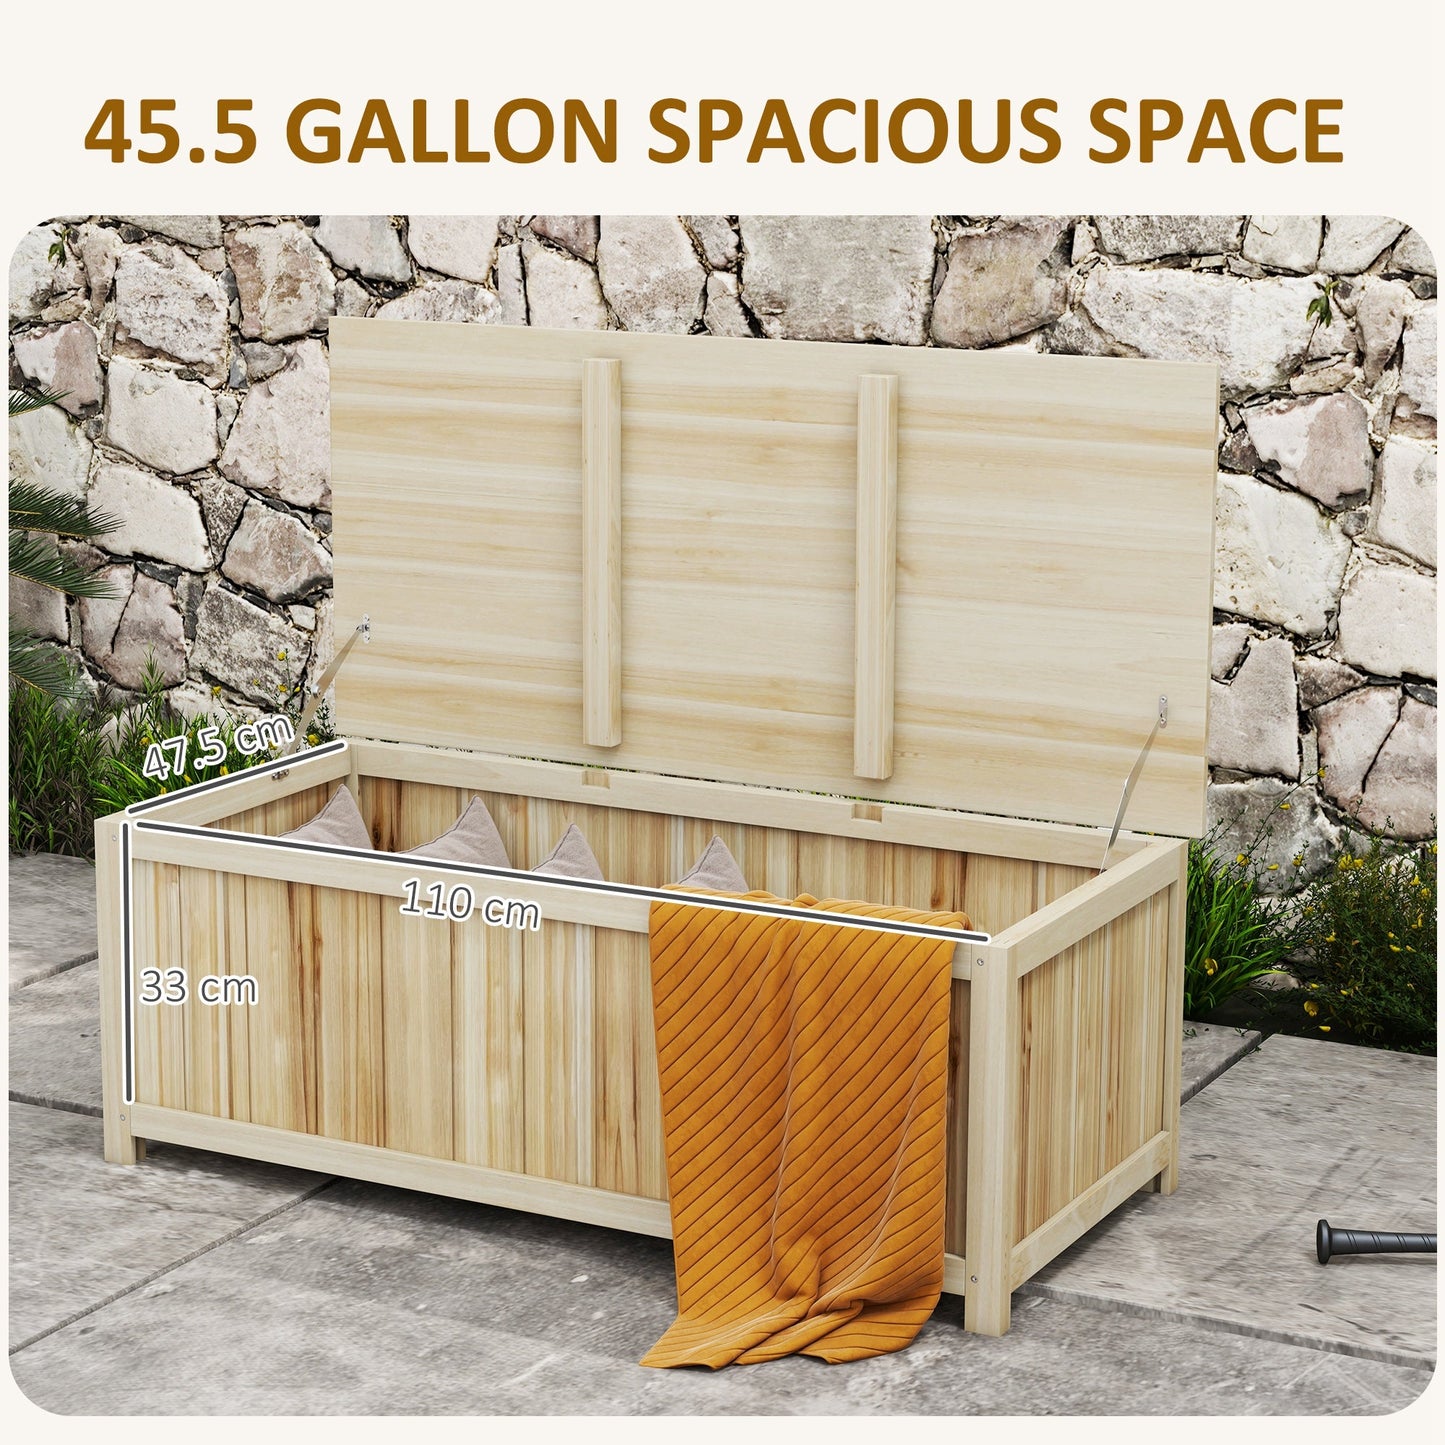 -Outsunny Wooden Outdoor Storage Box Bench, 45.5 Gallon Deck Box, for Patio, Pool, Balcony, Porch - Outdoor Style Company